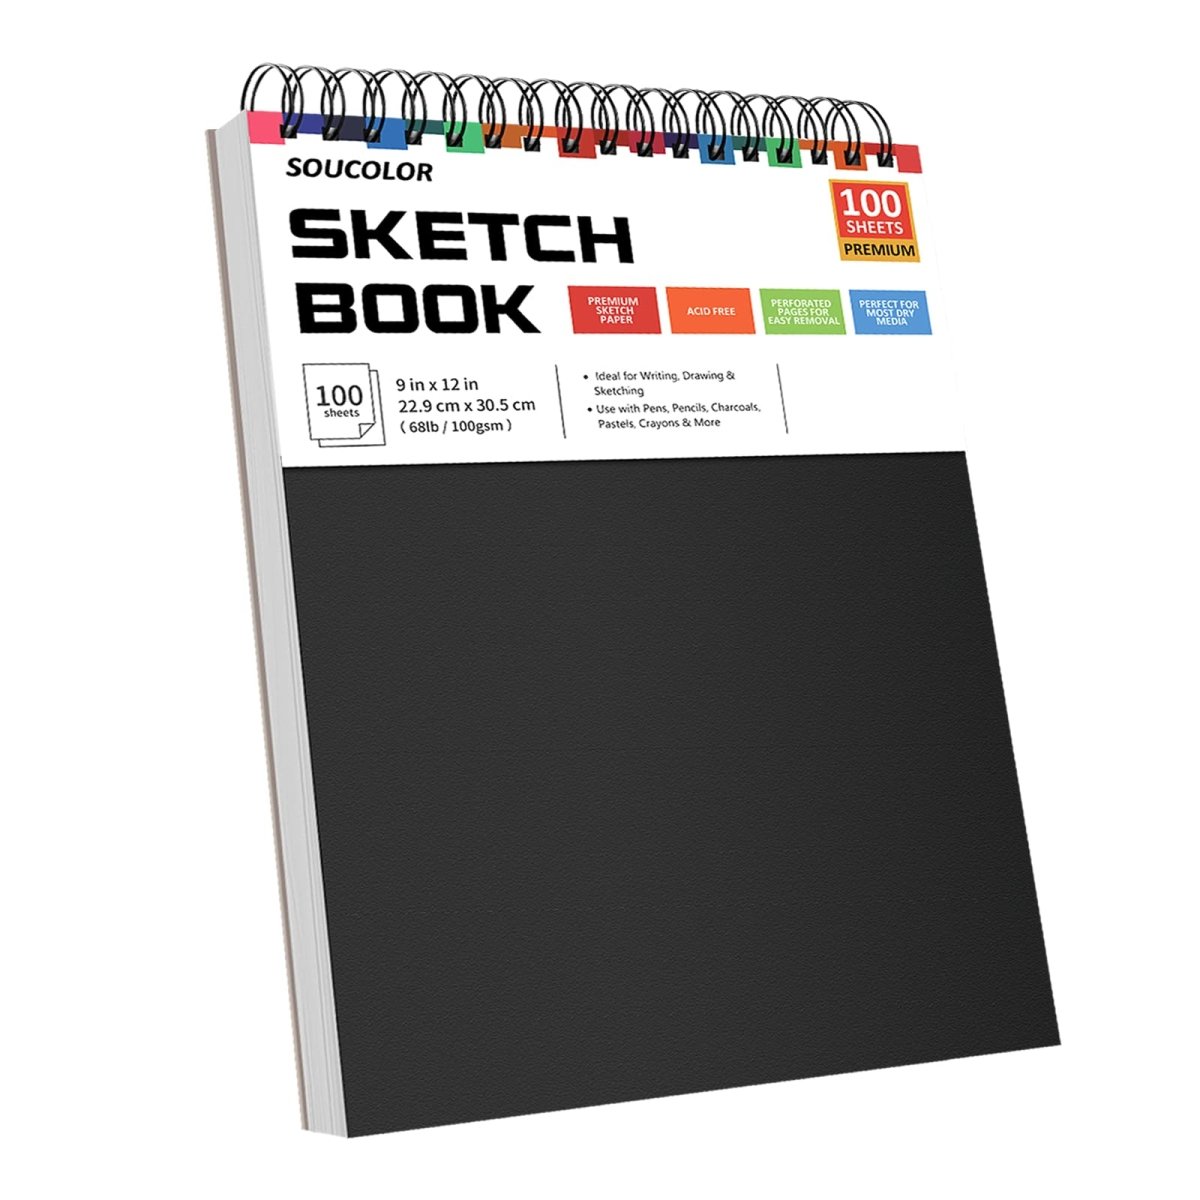 Soucolor 9" x 12" Sketch Book, 1-Pack 100 Sheets Spiral Bound Art Sketchbook, Acid Free (68lb/100gsm) Artist Drawing Book Paper Painting Sketching Pad - Tattoo Unleashed